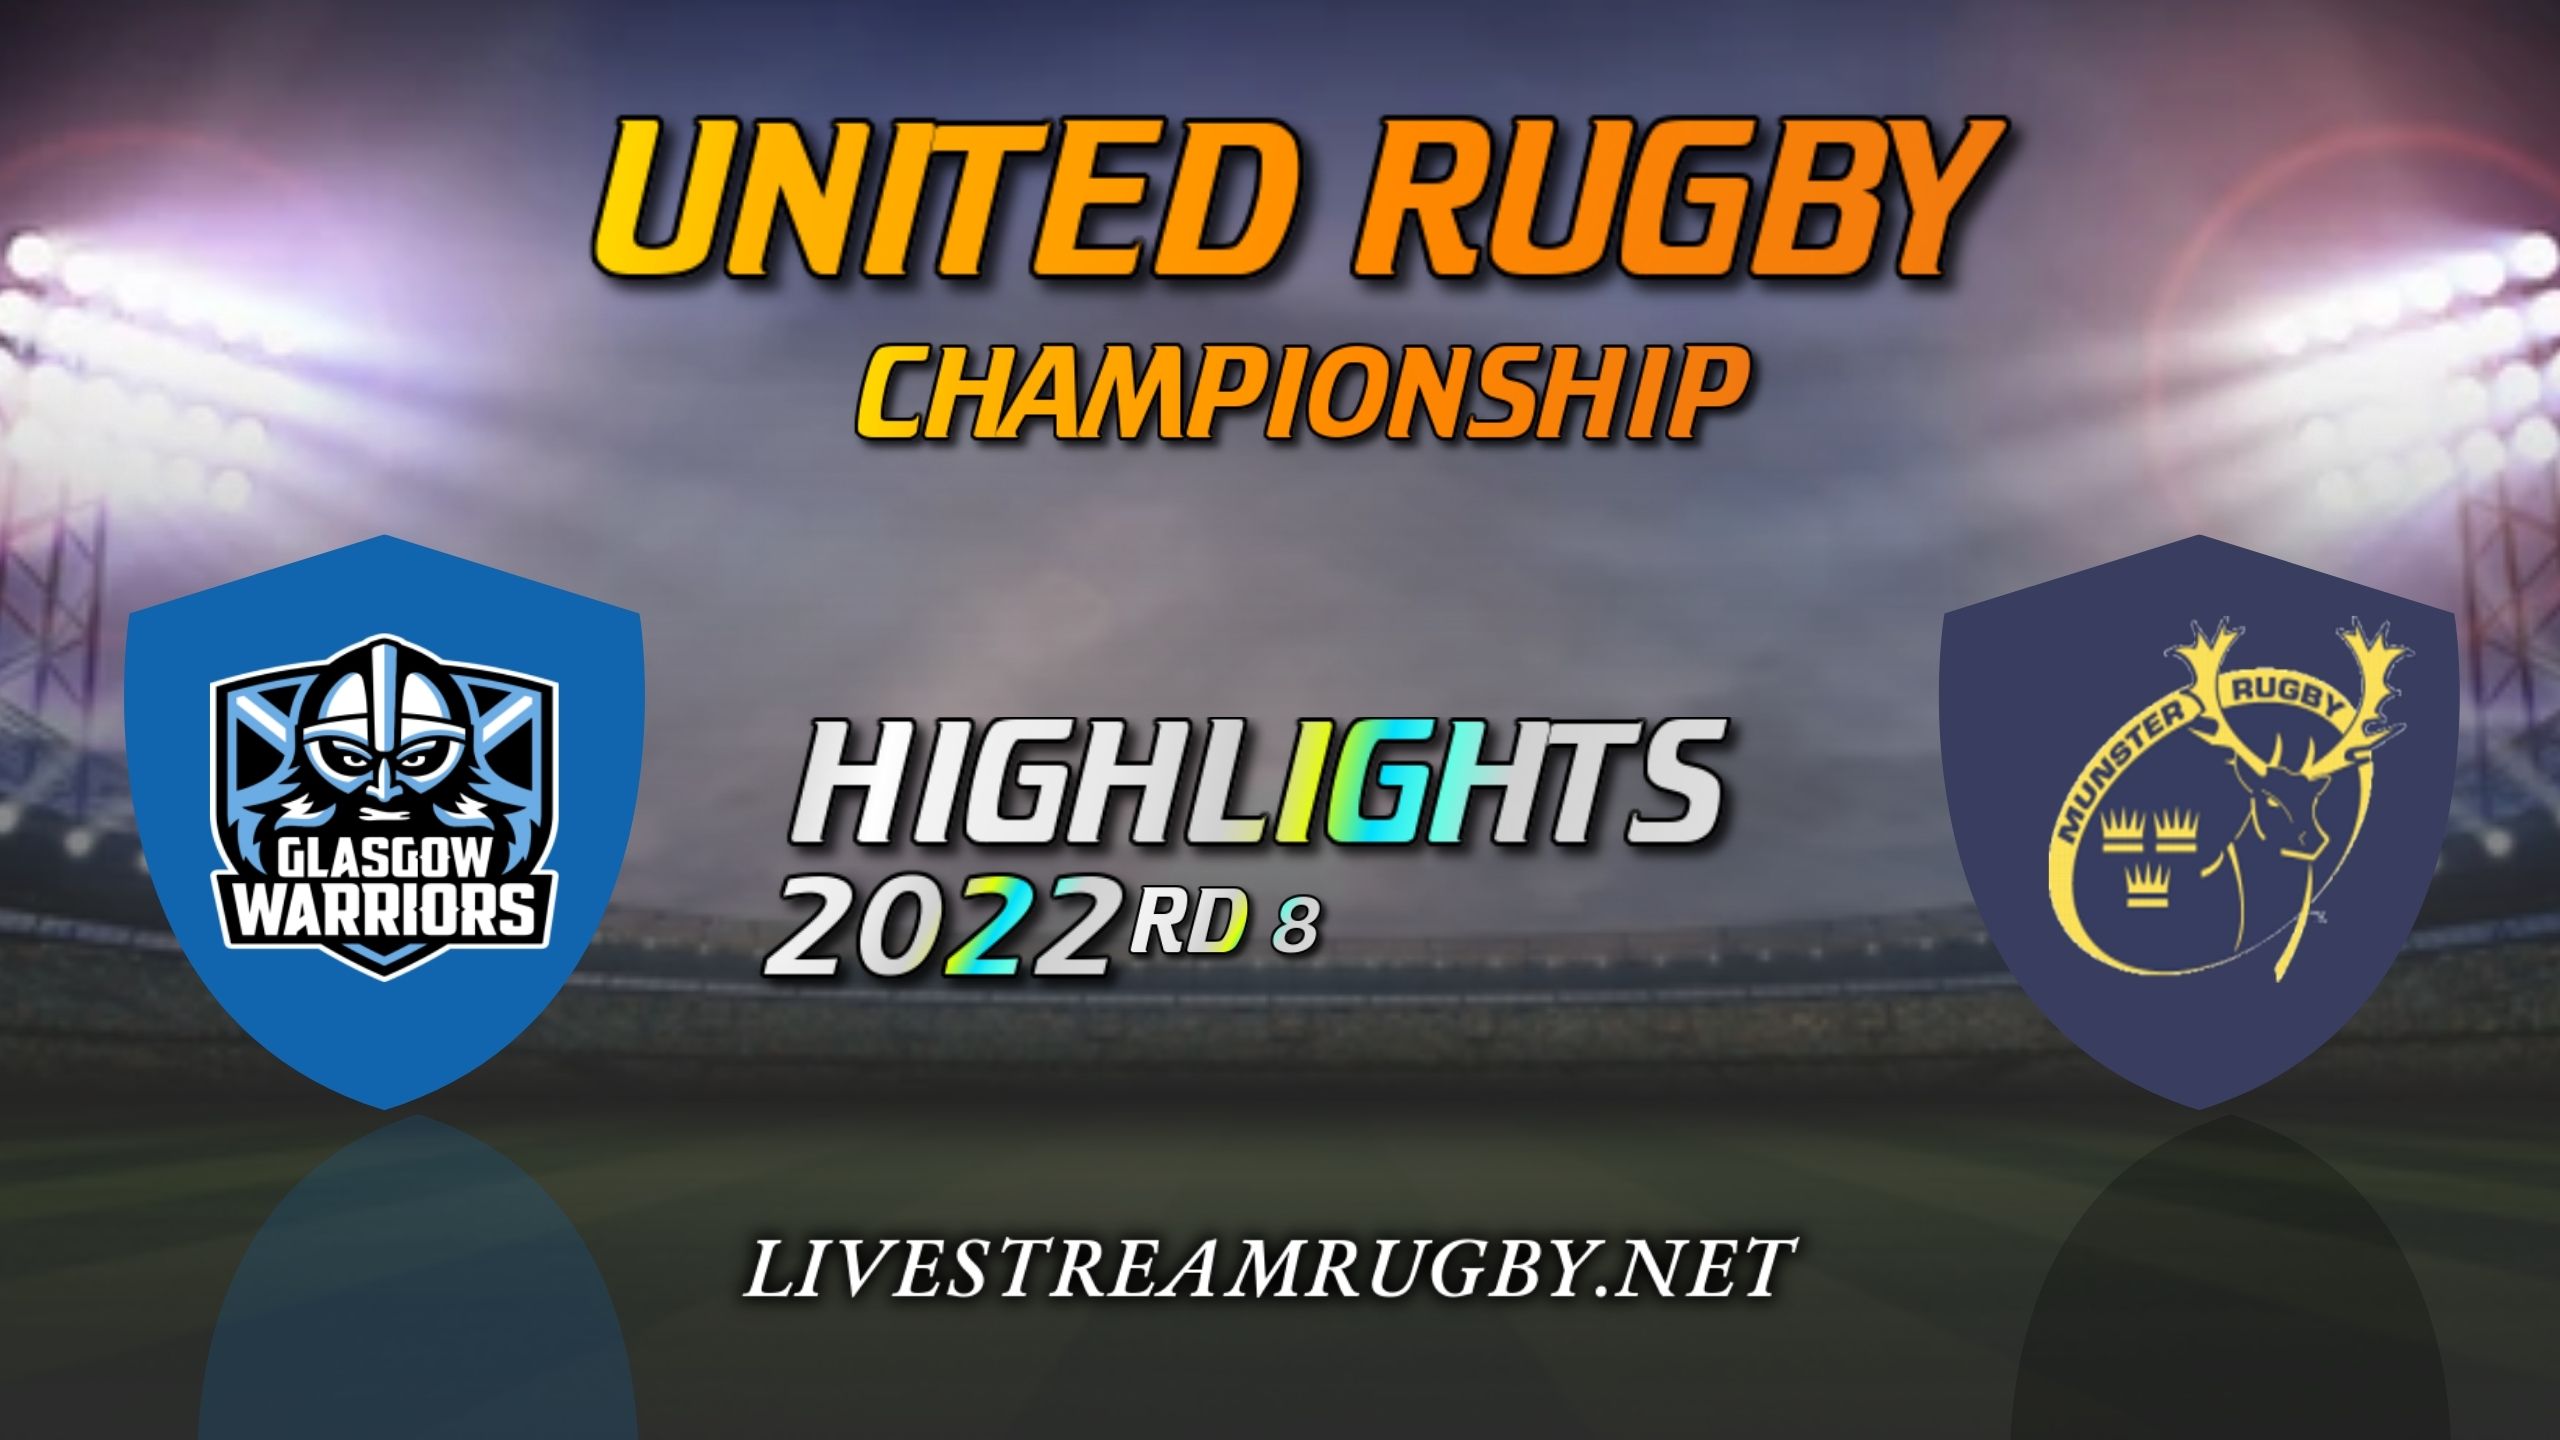 Glasgow Warriors Vs Munster Highlights 2022 Rd 8 United Rugby